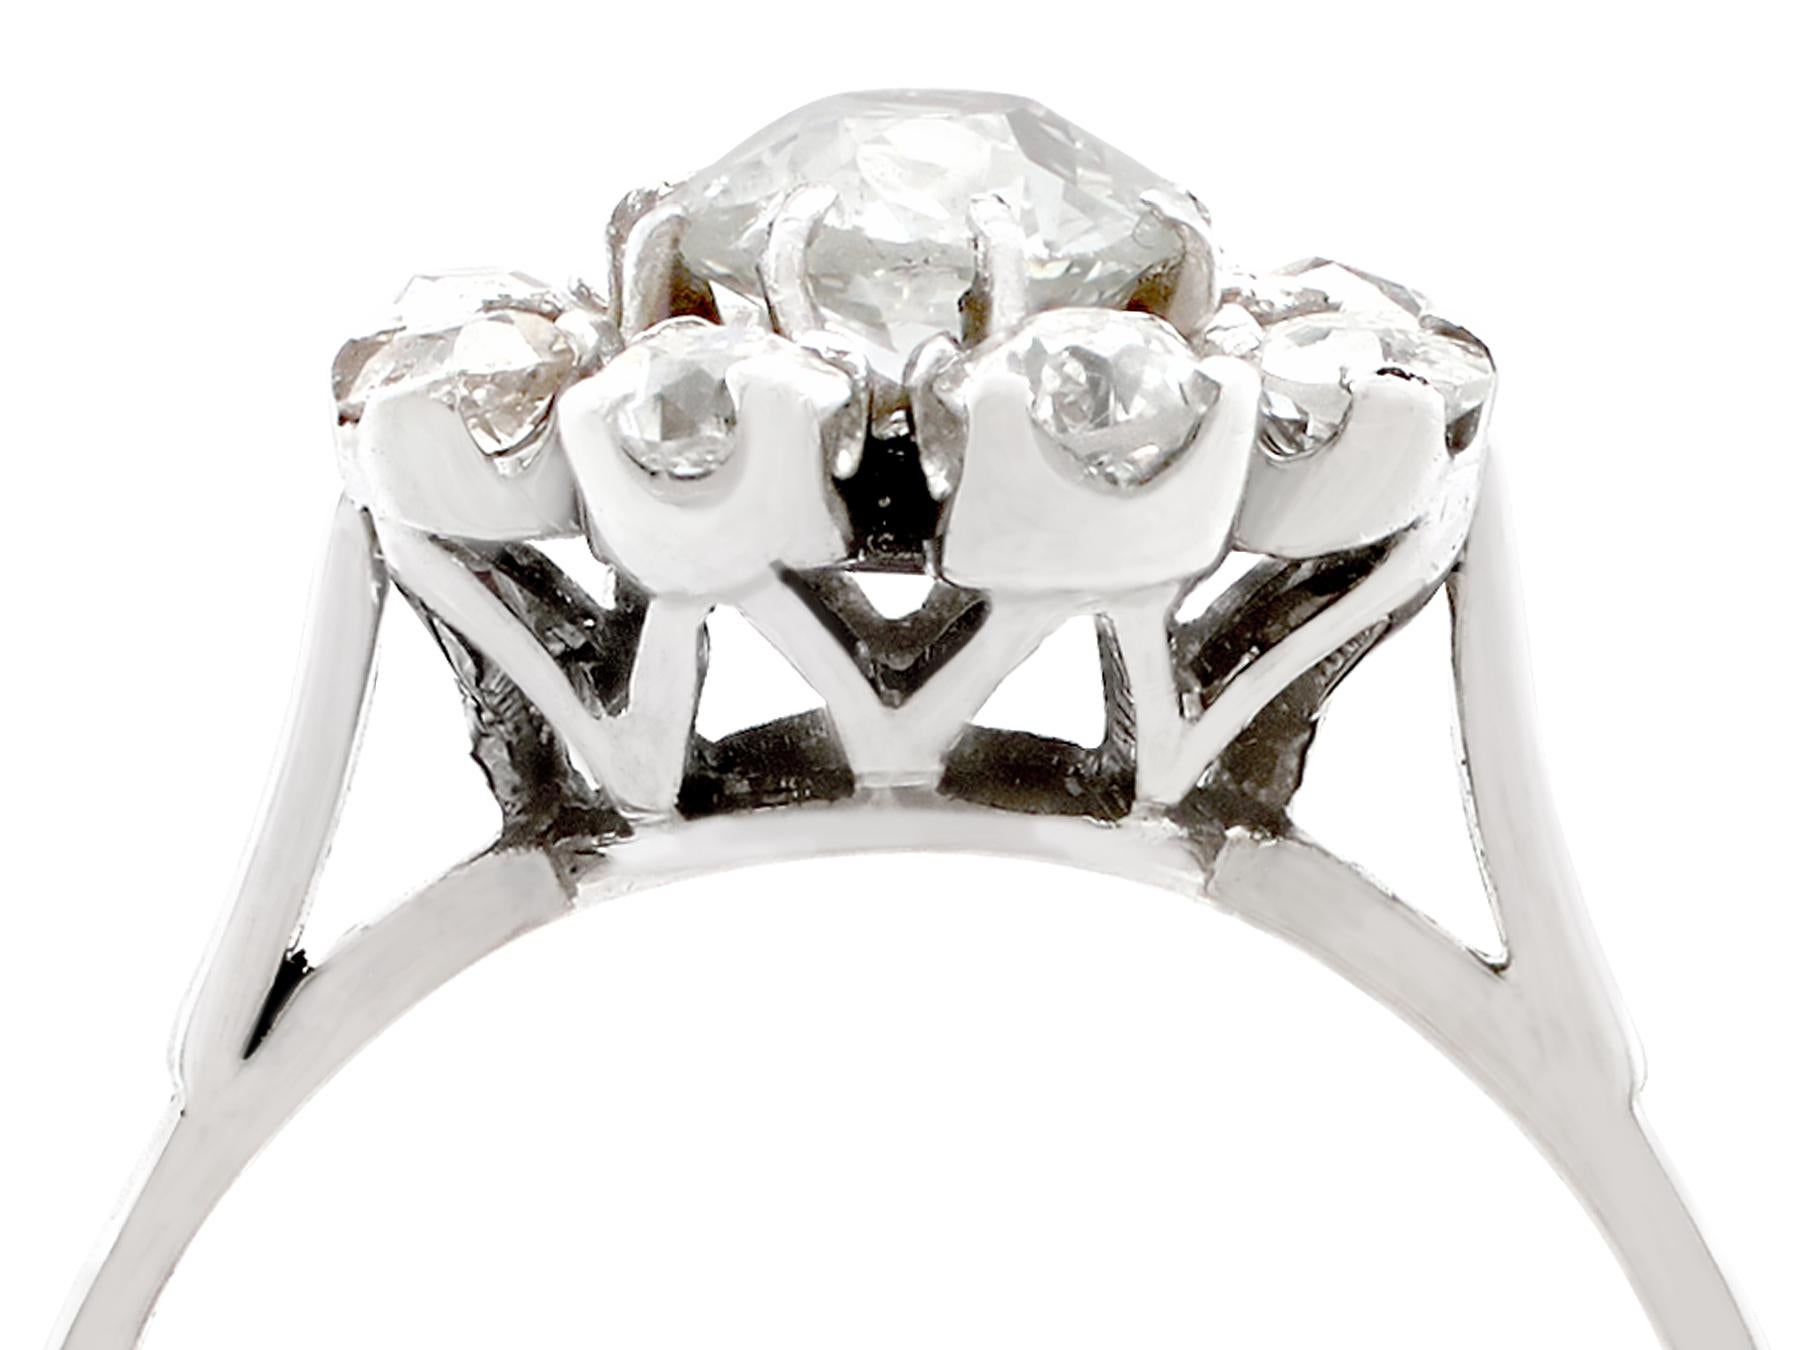 An impressive antique French 1.41 carat diamond and 18k white gold cluster ring; part of our diverse antique jewellery and estate jewelry collections.

This fine and impressive antique French diamond ring has been crafted in 18k white gold.

The